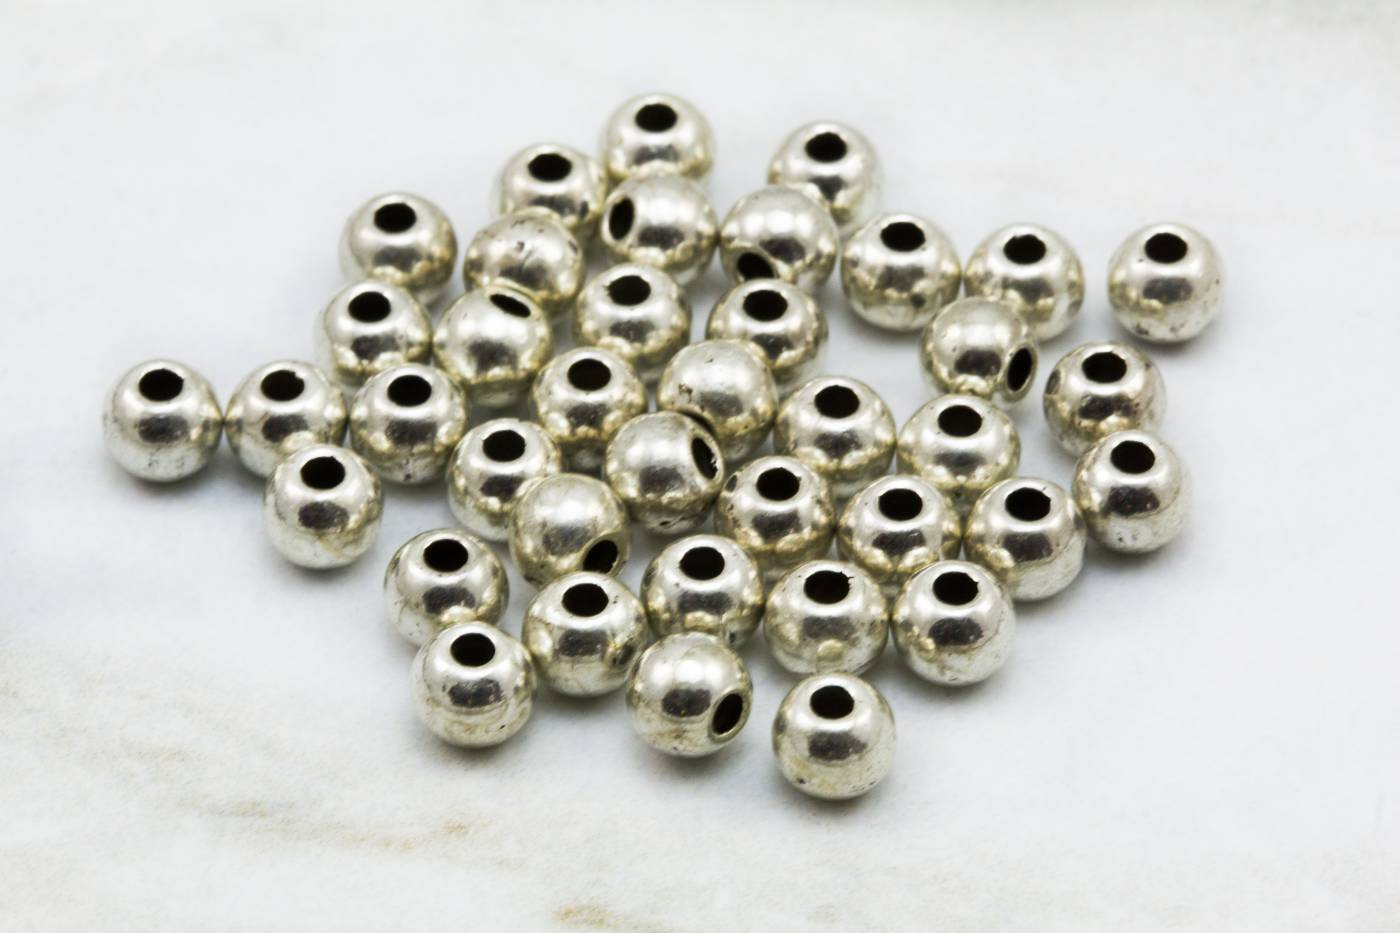 5mm-metal-ball-spacer-bead-charm-finding